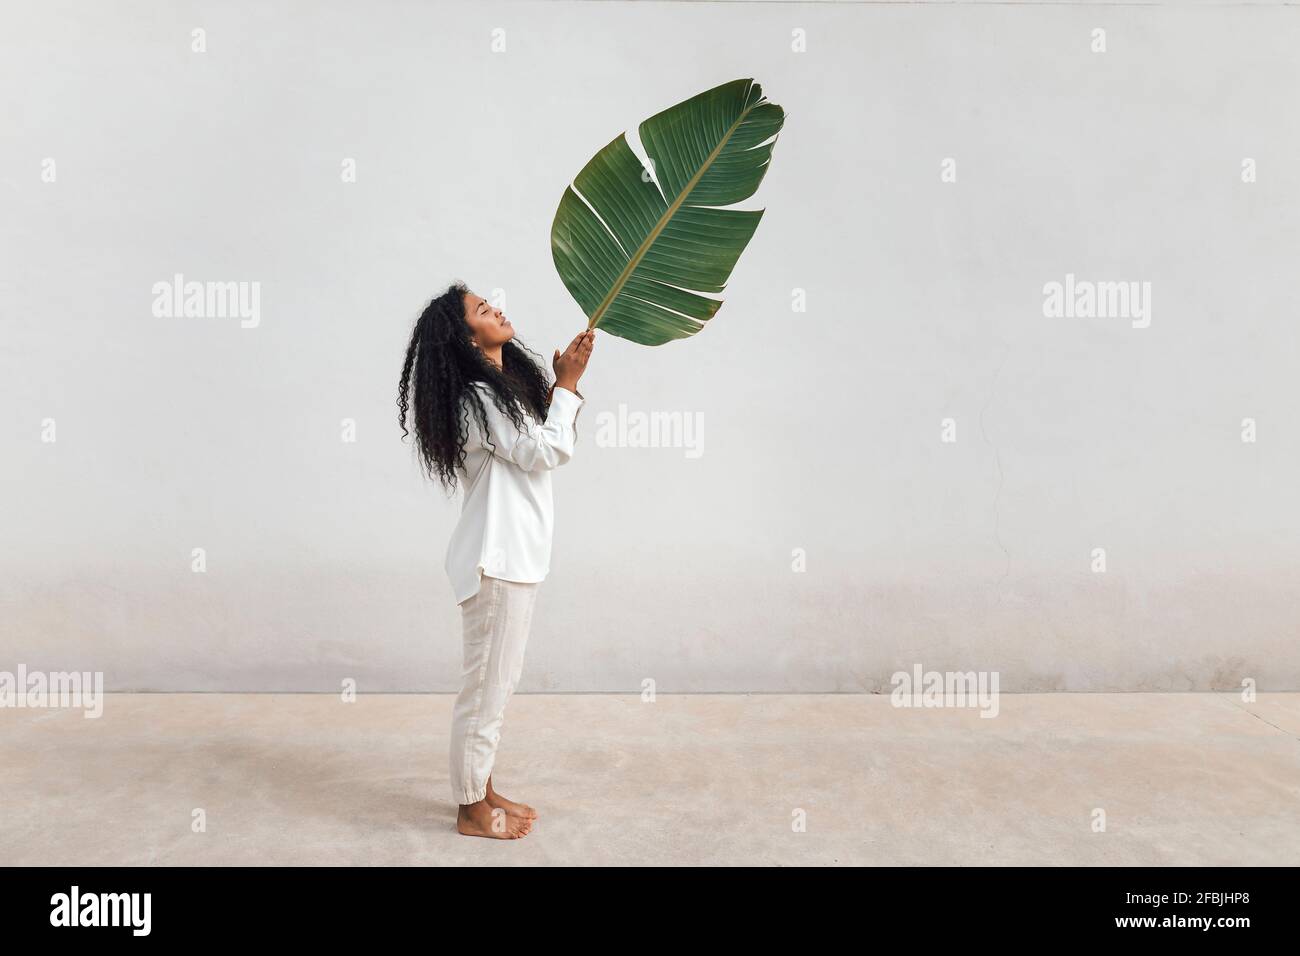 Young woman with curly hair holding big green leaf standing by white wall Stock Photo